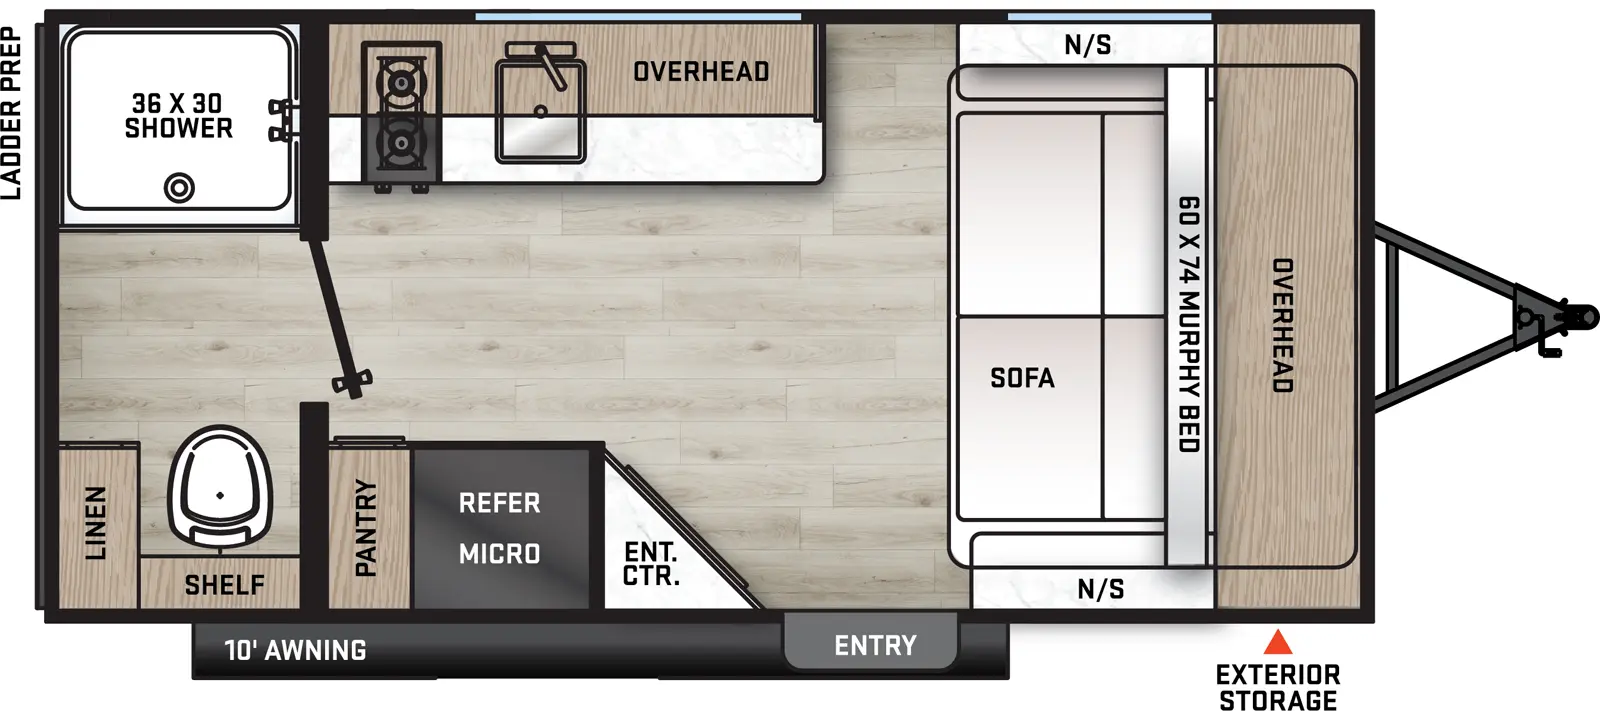 The 164RBX has zero slideout and one entry. Exterior features a 10 foot awning, and front storage. Interior layout front to back: murphy bed sofa with overhead cabinet and night stands on each side; off-door side kitchen counter with sink, overhead cabinets and cooktop; door side entry, angled entertainment center, refrigerator with microwave overhead, and pantry; rear bathroom with toilet, shower, linen closet and shelf only.